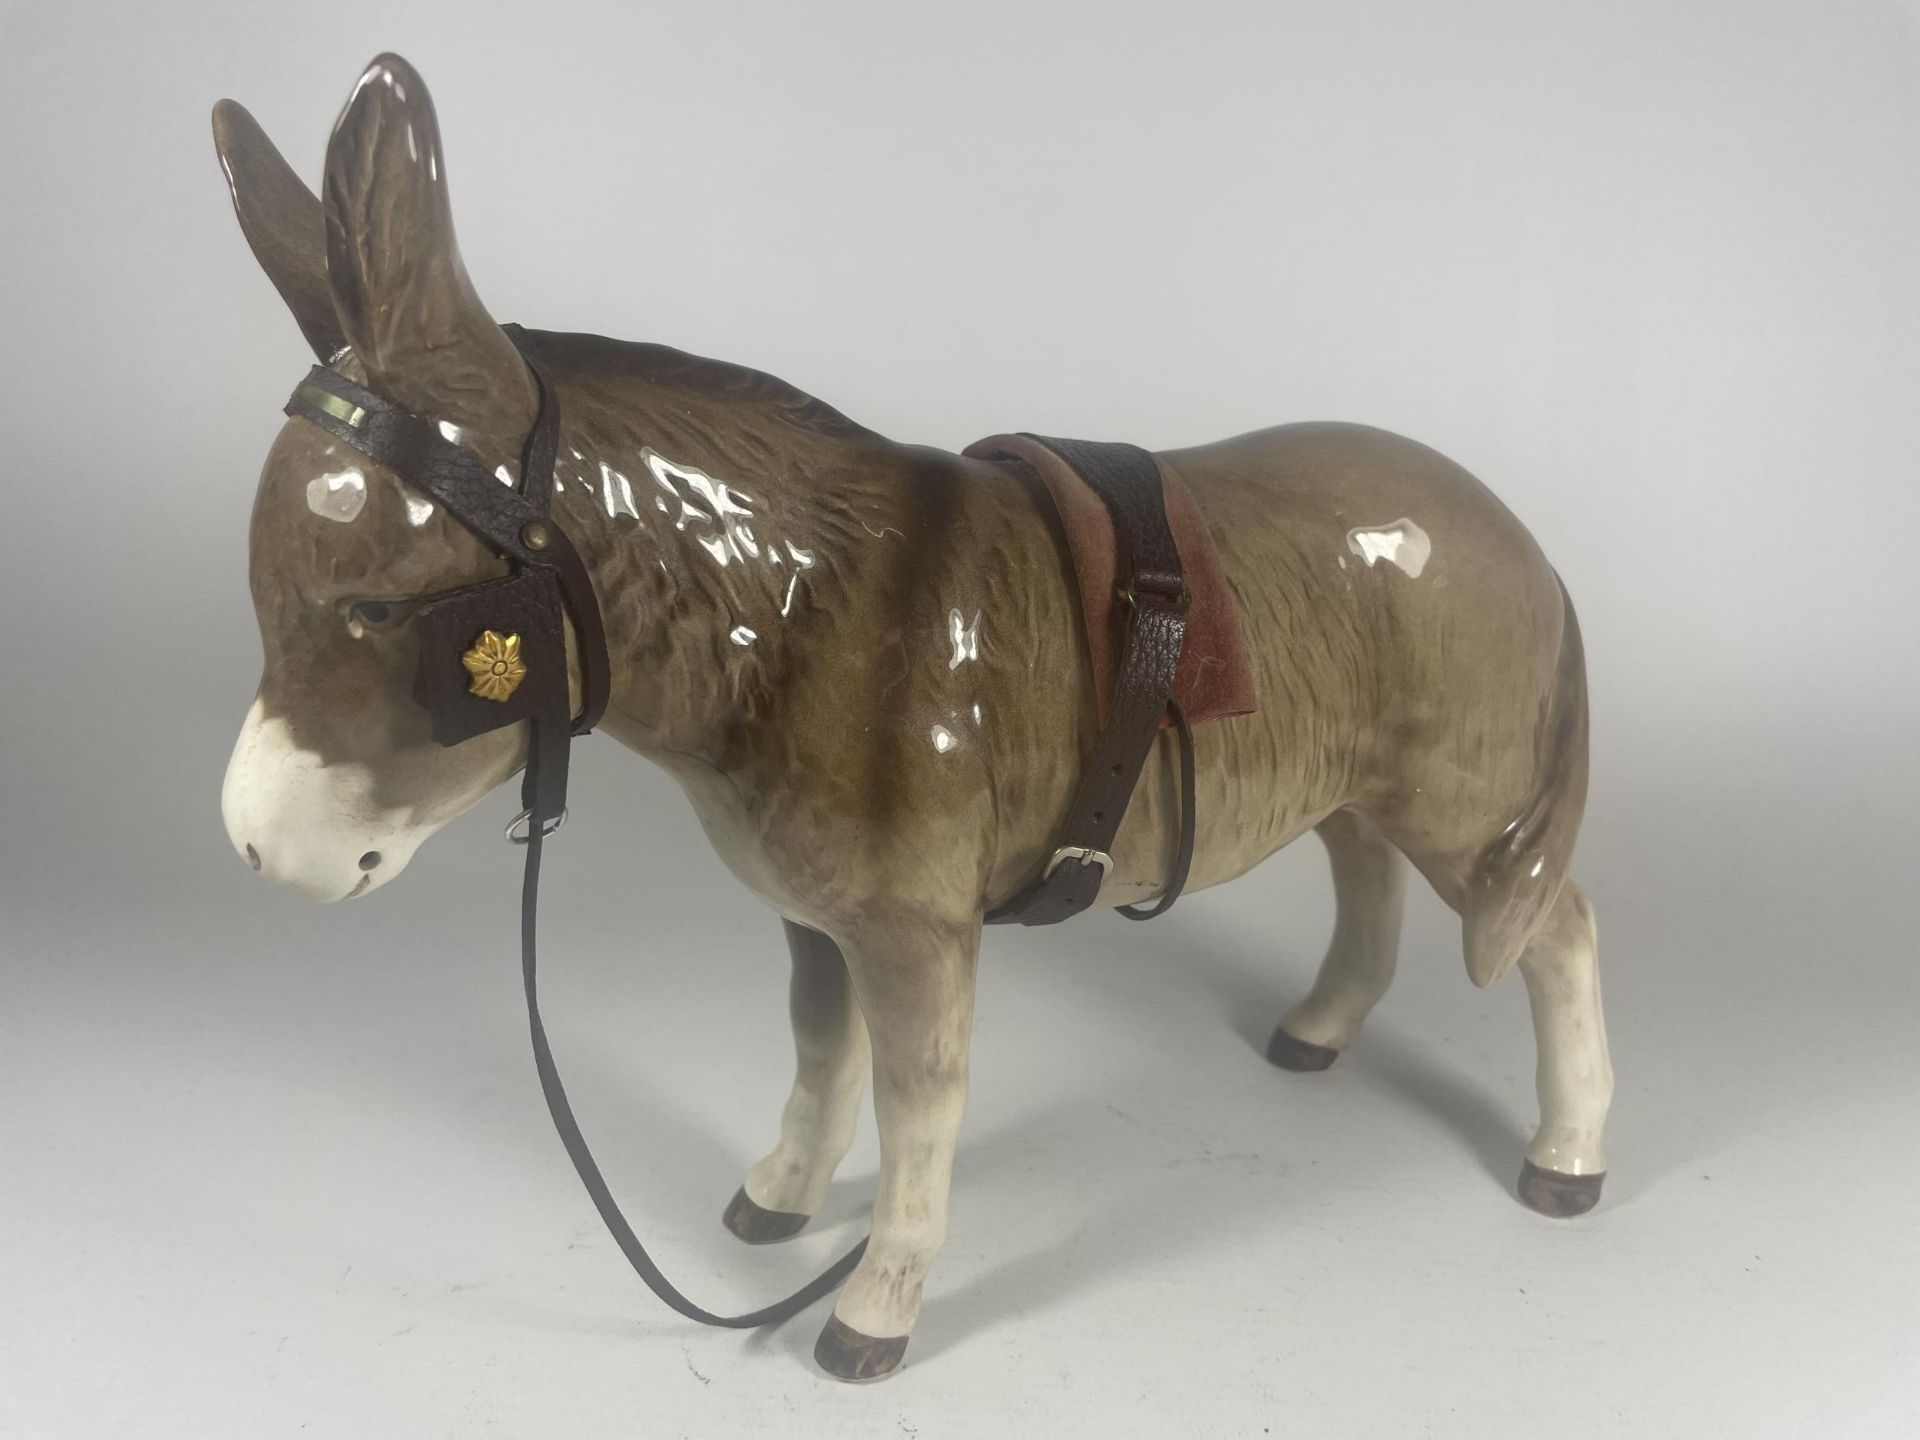 A SYLVAC DONKEY FIGURE WITH LEATHER REIGNS